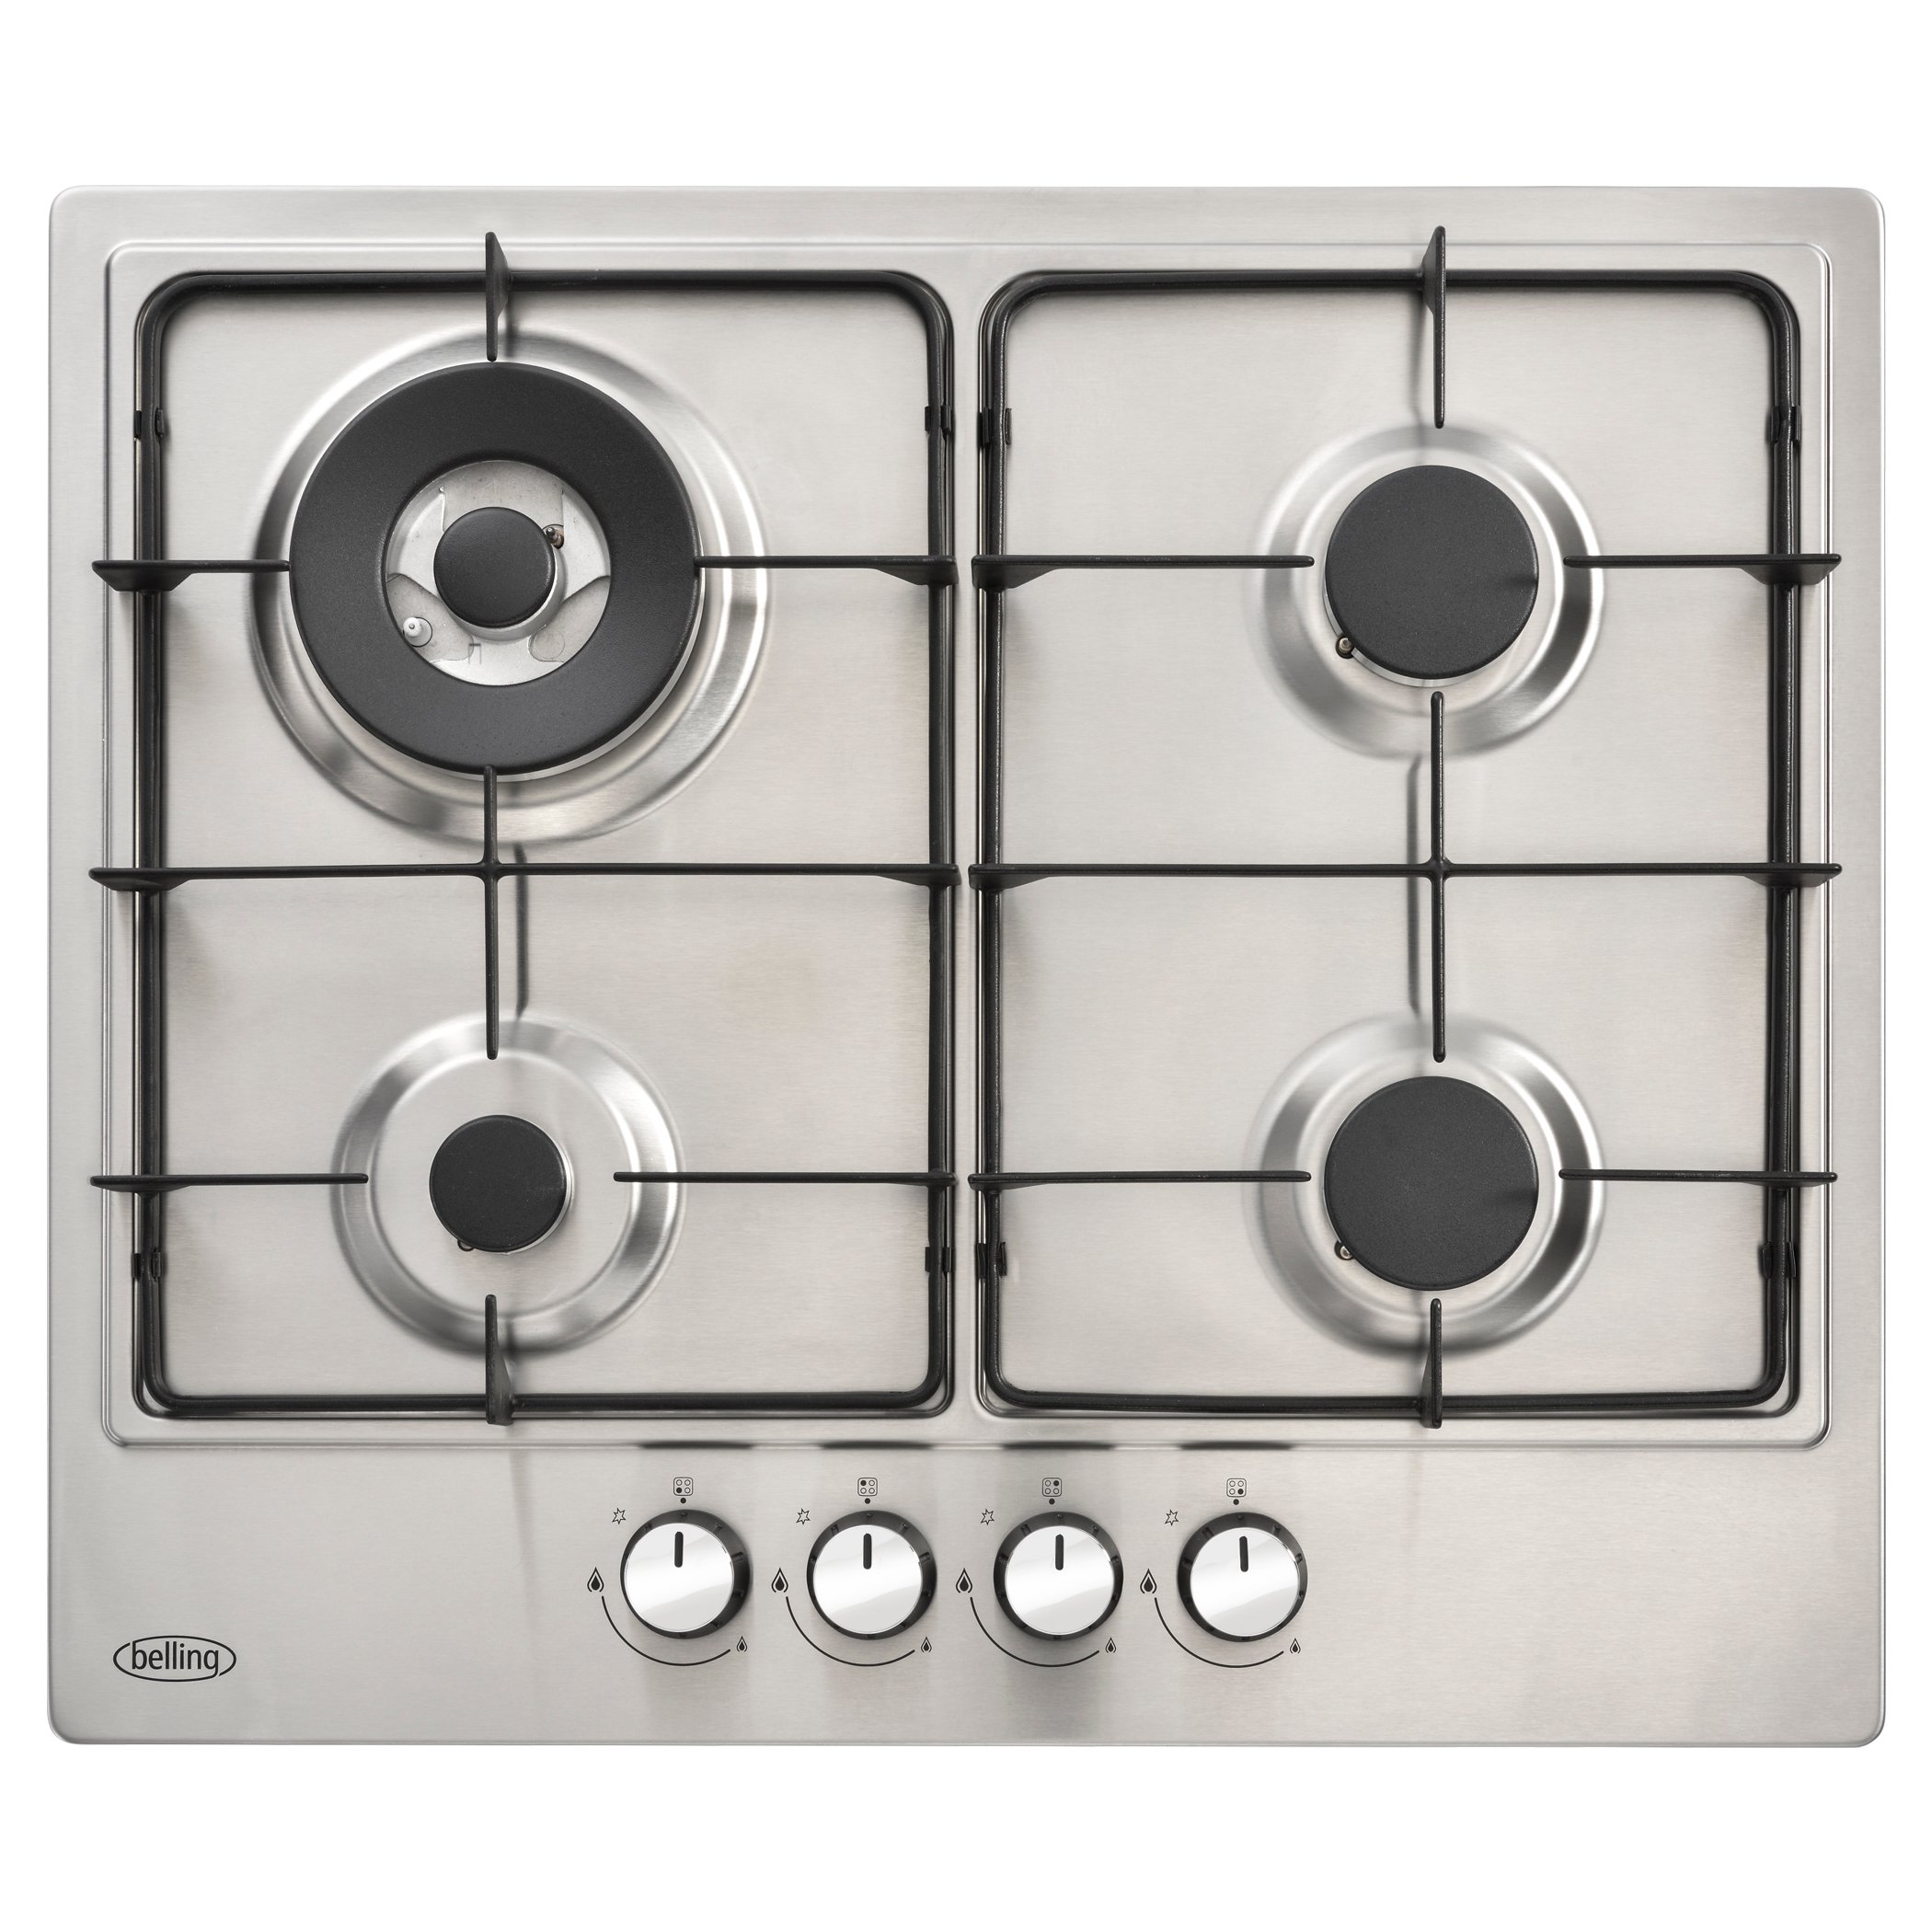 60cm stainless steel gas hob with powerful 3.6kW wok burner and cast enamel pan supports. Additional features include auto ignition and a flame safety device.